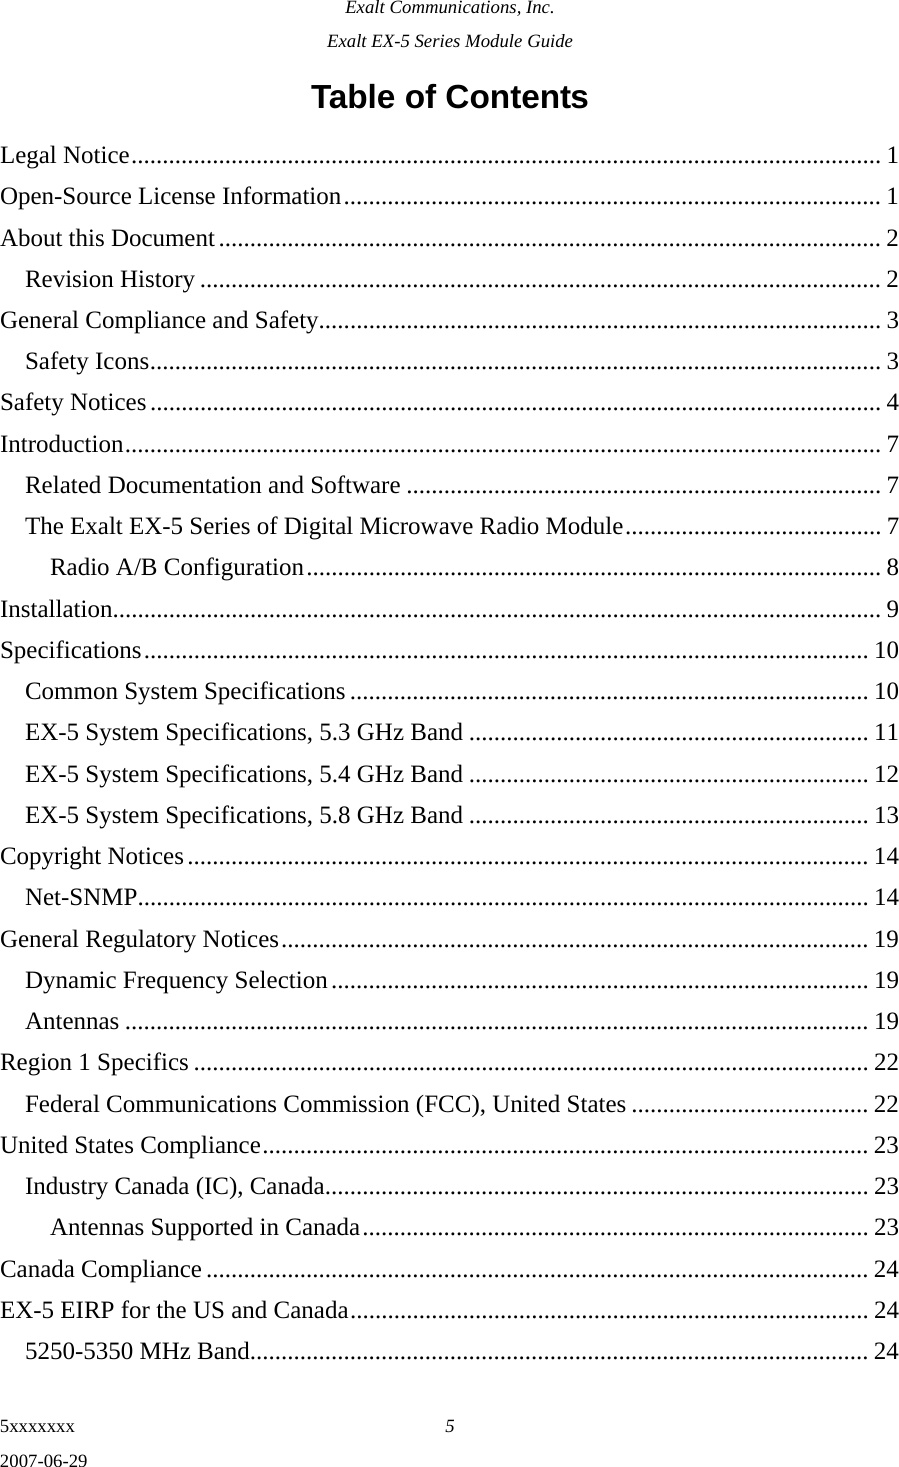 Exalt Communications, Inc. Exalt EX-5 Series Module Guide 5xxxxxxx  5 2007-06-29 Table of Contents Legal Notice........................................................................................................................ 1 Open-Source License Information...................................................................................... 1 About this Document.......................................................................................................... 2 Revision History ............................................................................................................. 2 General Compliance and Safety.......................................................................................... 3 Safety Icons..................................................................................................................... 3 Safety Notices..................................................................................................................... 4 Introduction......................................................................................................................... 7 Related Documentation and Software ............................................................................ 7 The Exalt EX-5 Series of Digital Microwave Radio Module......................................... 7 Radio A/B Configuration............................................................................................ 8 Installation........................................................................................................................... 9 Specifications.................................................................................................................... 10 Common System Specifications................................................................................... 10 EX-5 System Specifications, 5.3 GHz Band ................................................................ 11 EX-5 System Specifications, 5.4 GHz Band ................................................................ 12 EX-5 System Specifications, 5.8 GHz Band ................................................................ 13 Copyright Notices............................................................................................................. 14 Net-SNMP..................................................................................................................... 14 General Regulatory Notices.............................................................................................. 19 Dynamic Frequency Selection...................................................................................... 19 Antennas ....................................................................................................................... 19 Region 1 Specifics ............................................................................................................ 22 Federal Communications Commission (FCC), United States ...................................... 22 United States Compliance................................................................................................. 23 Industry Canada (IC), Canada....................................................................................... 23 Antennas Supported in Canada................................................................................. 23 Canada Compliance .......................................................................................................... 24 EX-5 EIRP for the US and Canada................................................................................... 24 5250-5350 MHz Band................................................................................................... 24 